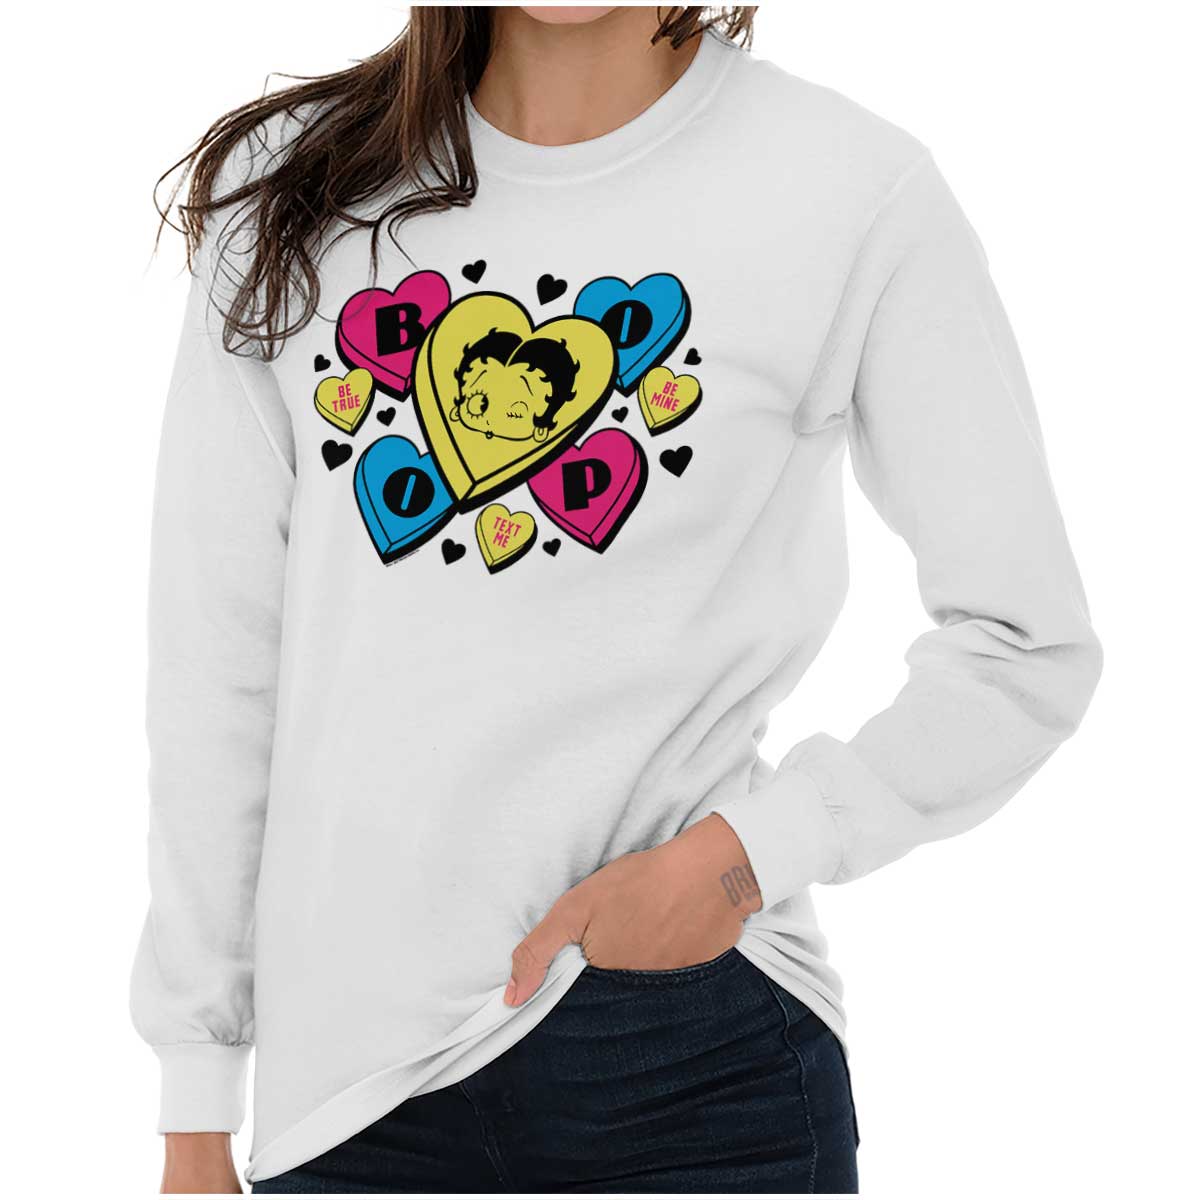 Betty Boop Tee, Betty Boop Heart T-shirt, Officially Licensed